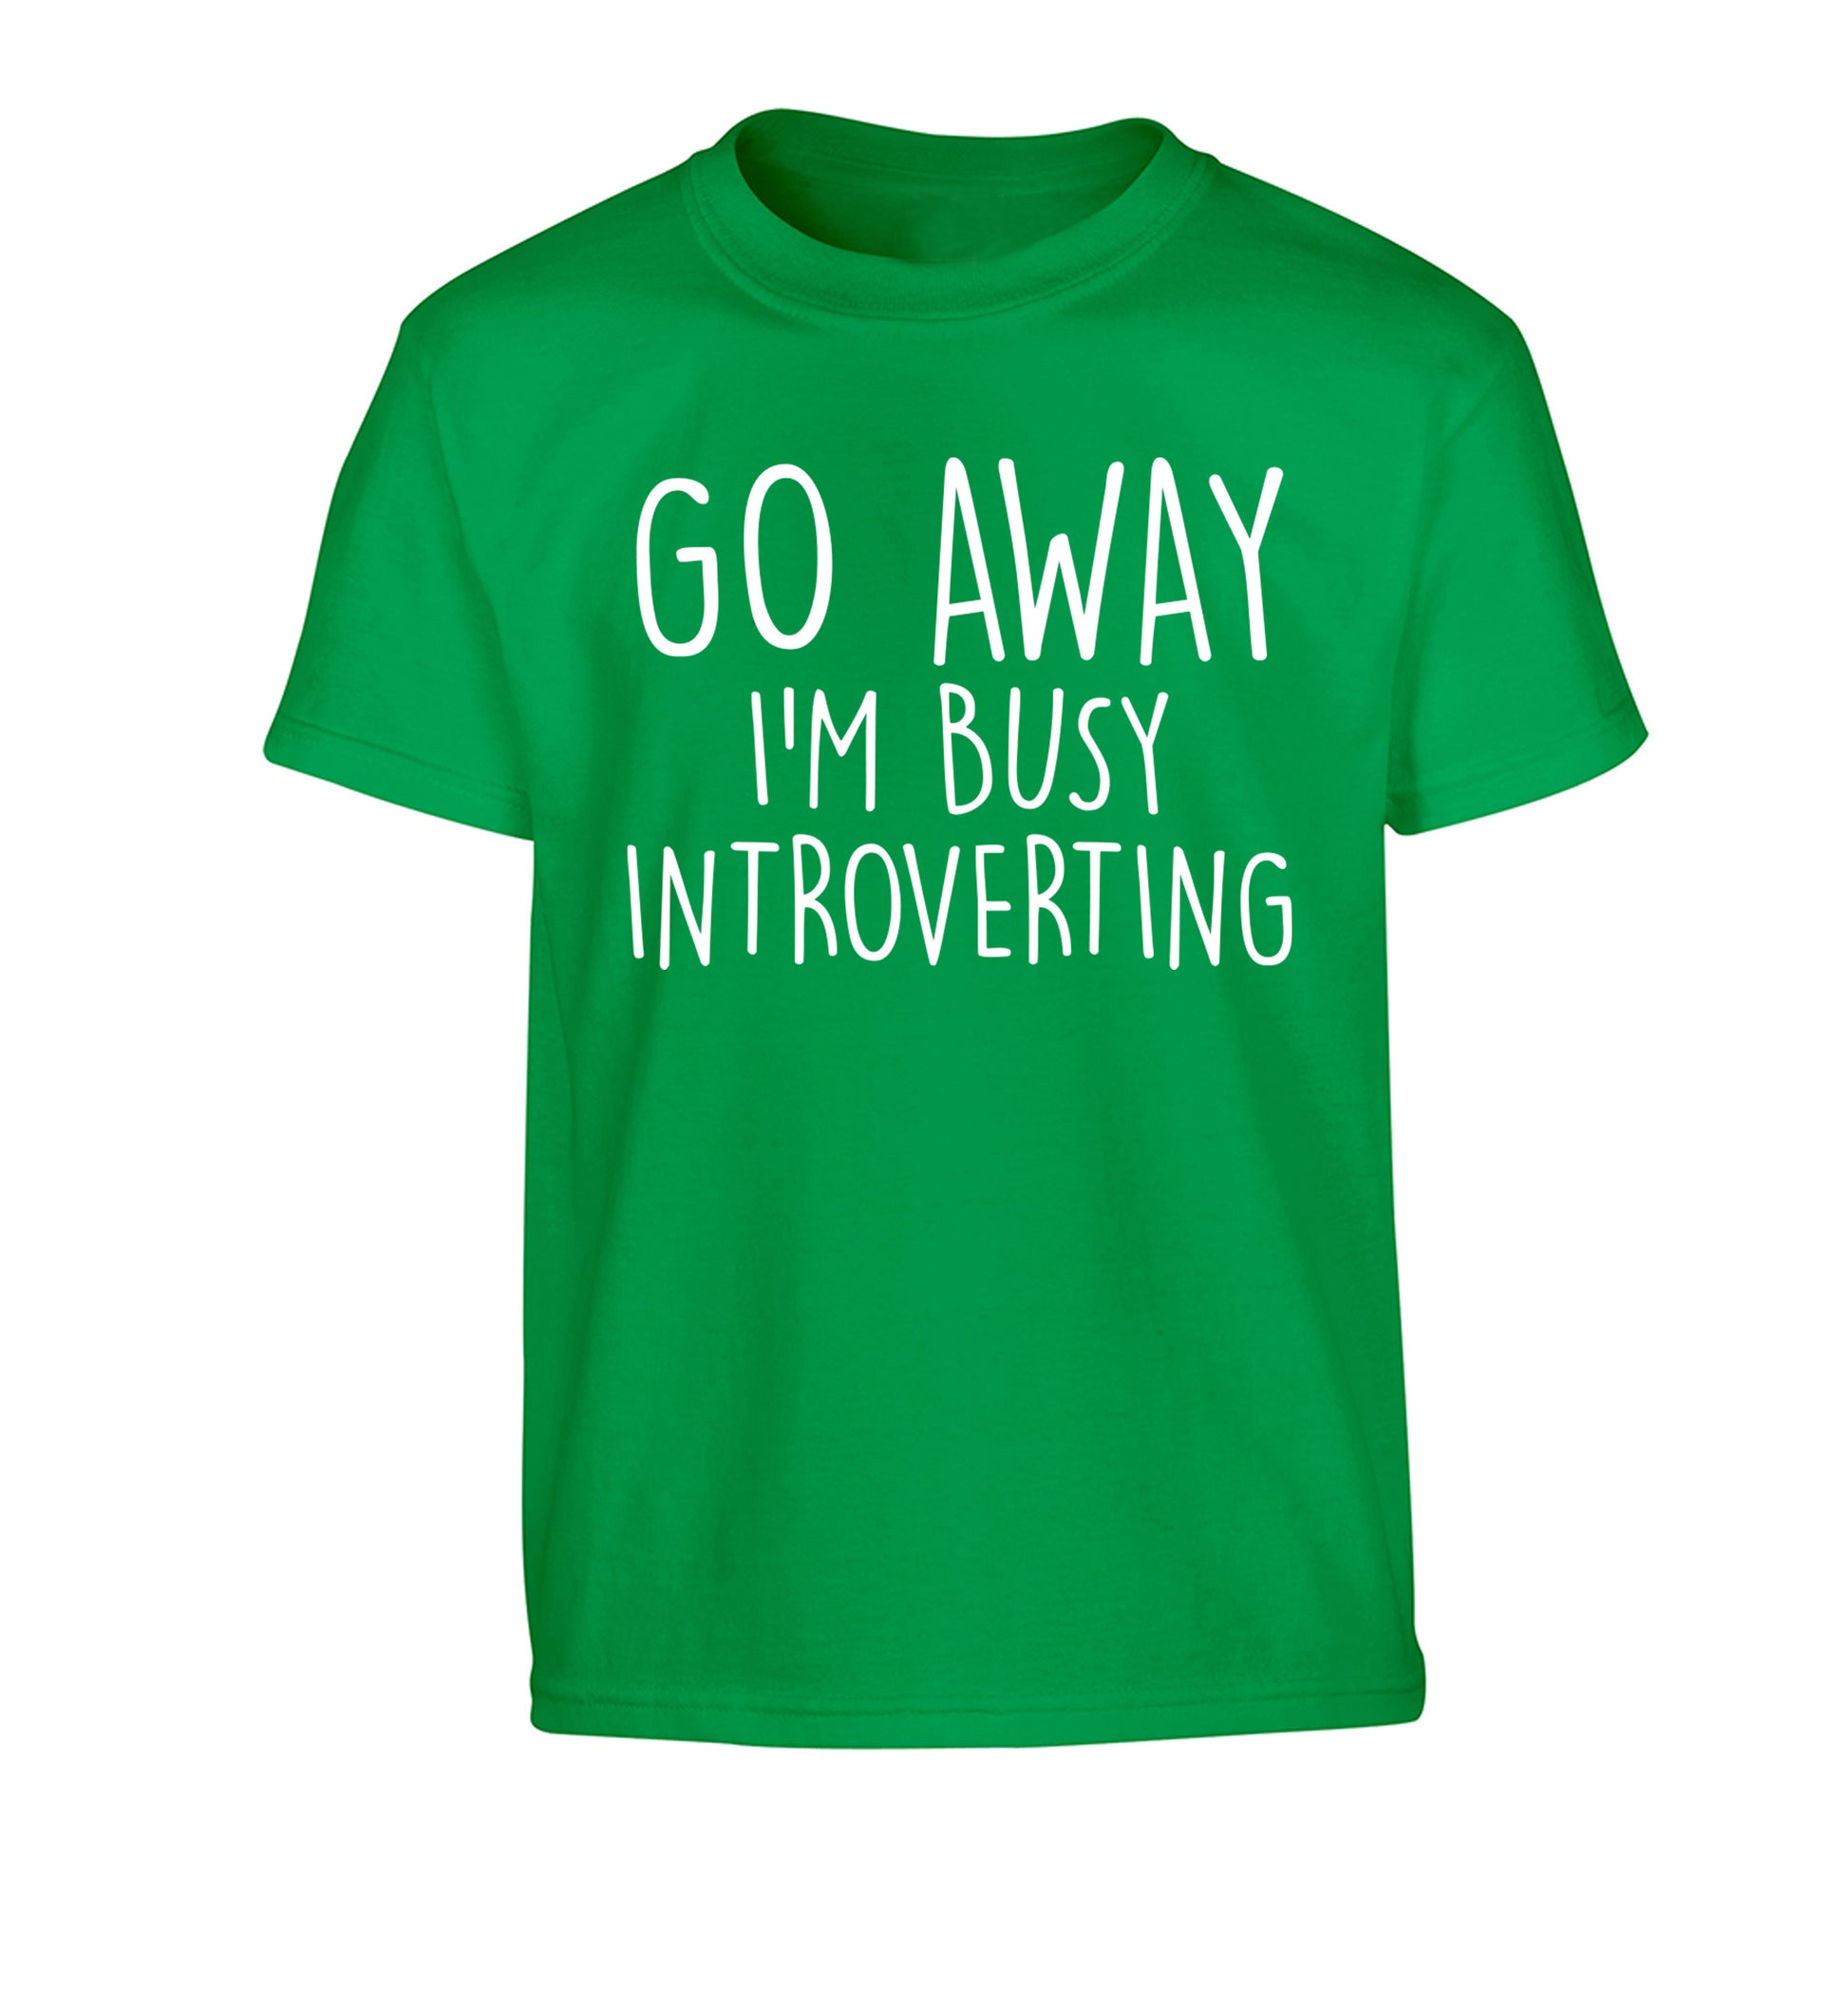 Go away I'm busy introverting Children's green Tshirt 12-13 Years